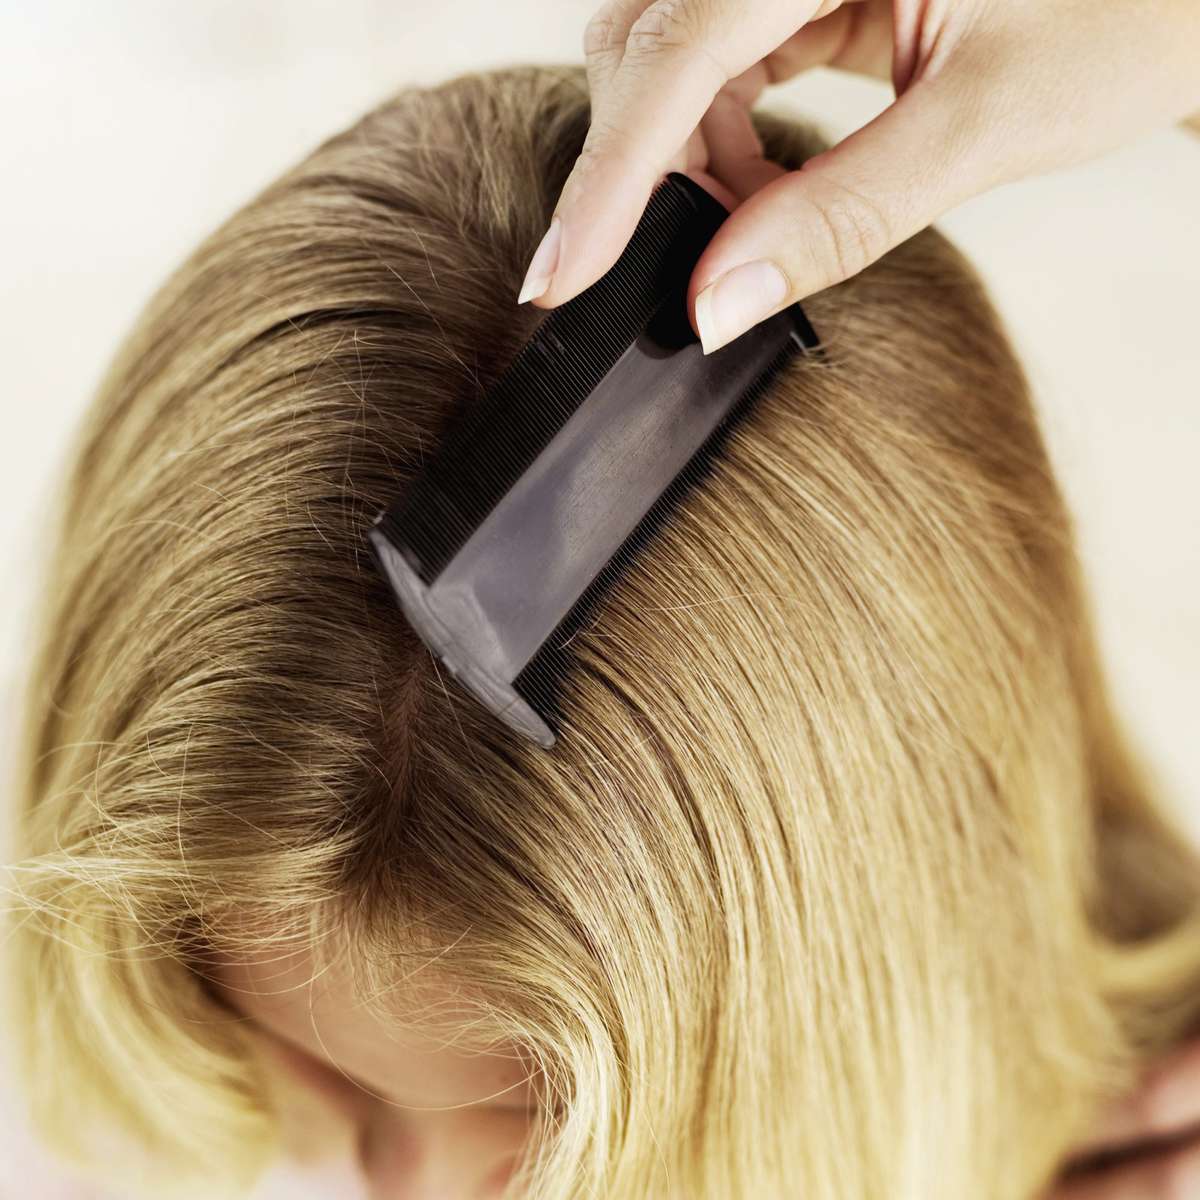 how-to-get-rid-of-lice-head-lice-comb